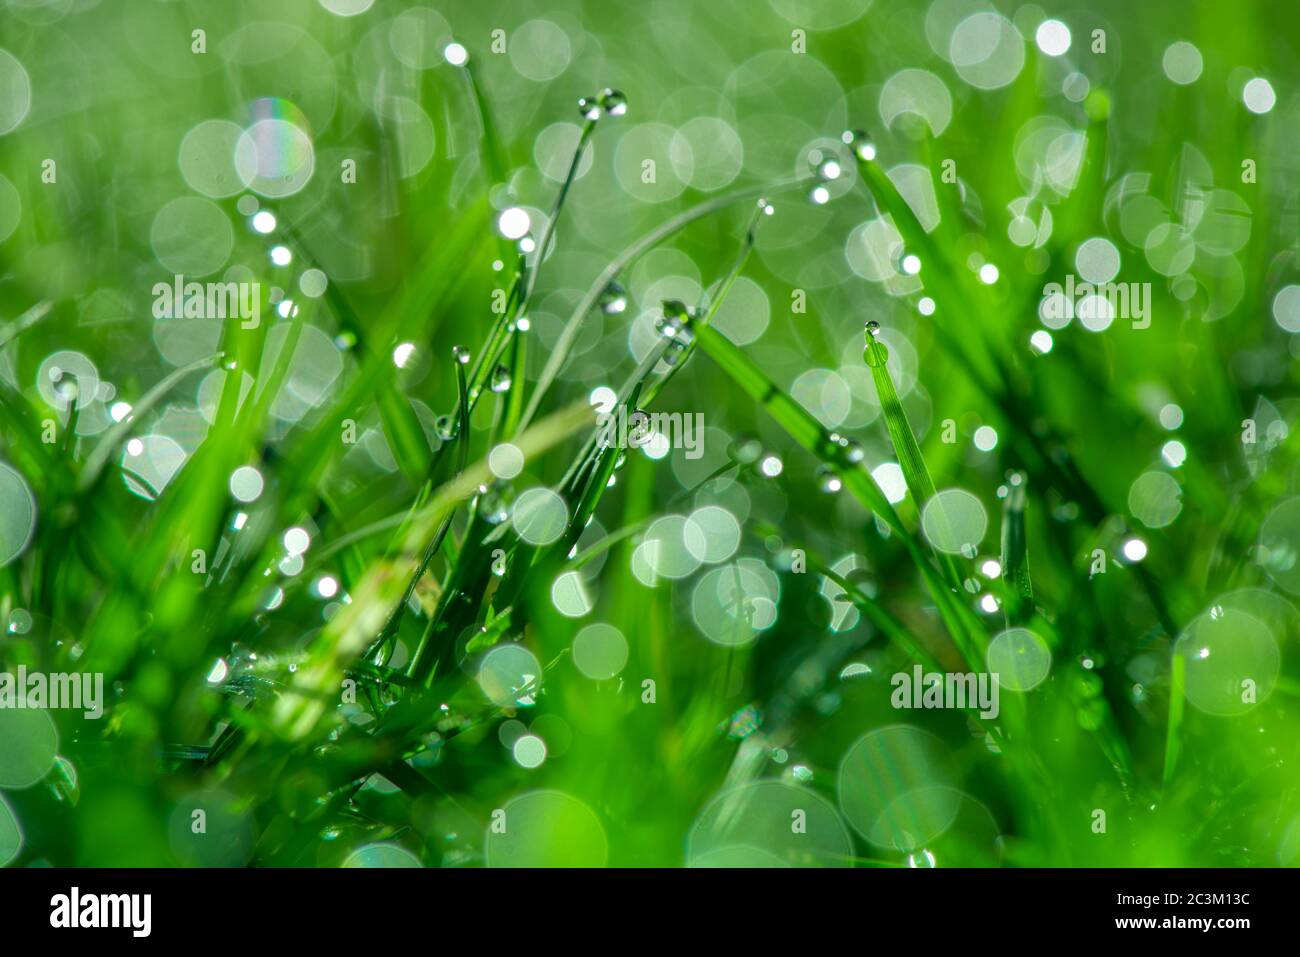 Fresh green grass with dew drops in sunshine and bokeh. Abstract blurry background. Nature background. copy space. Stock Photo